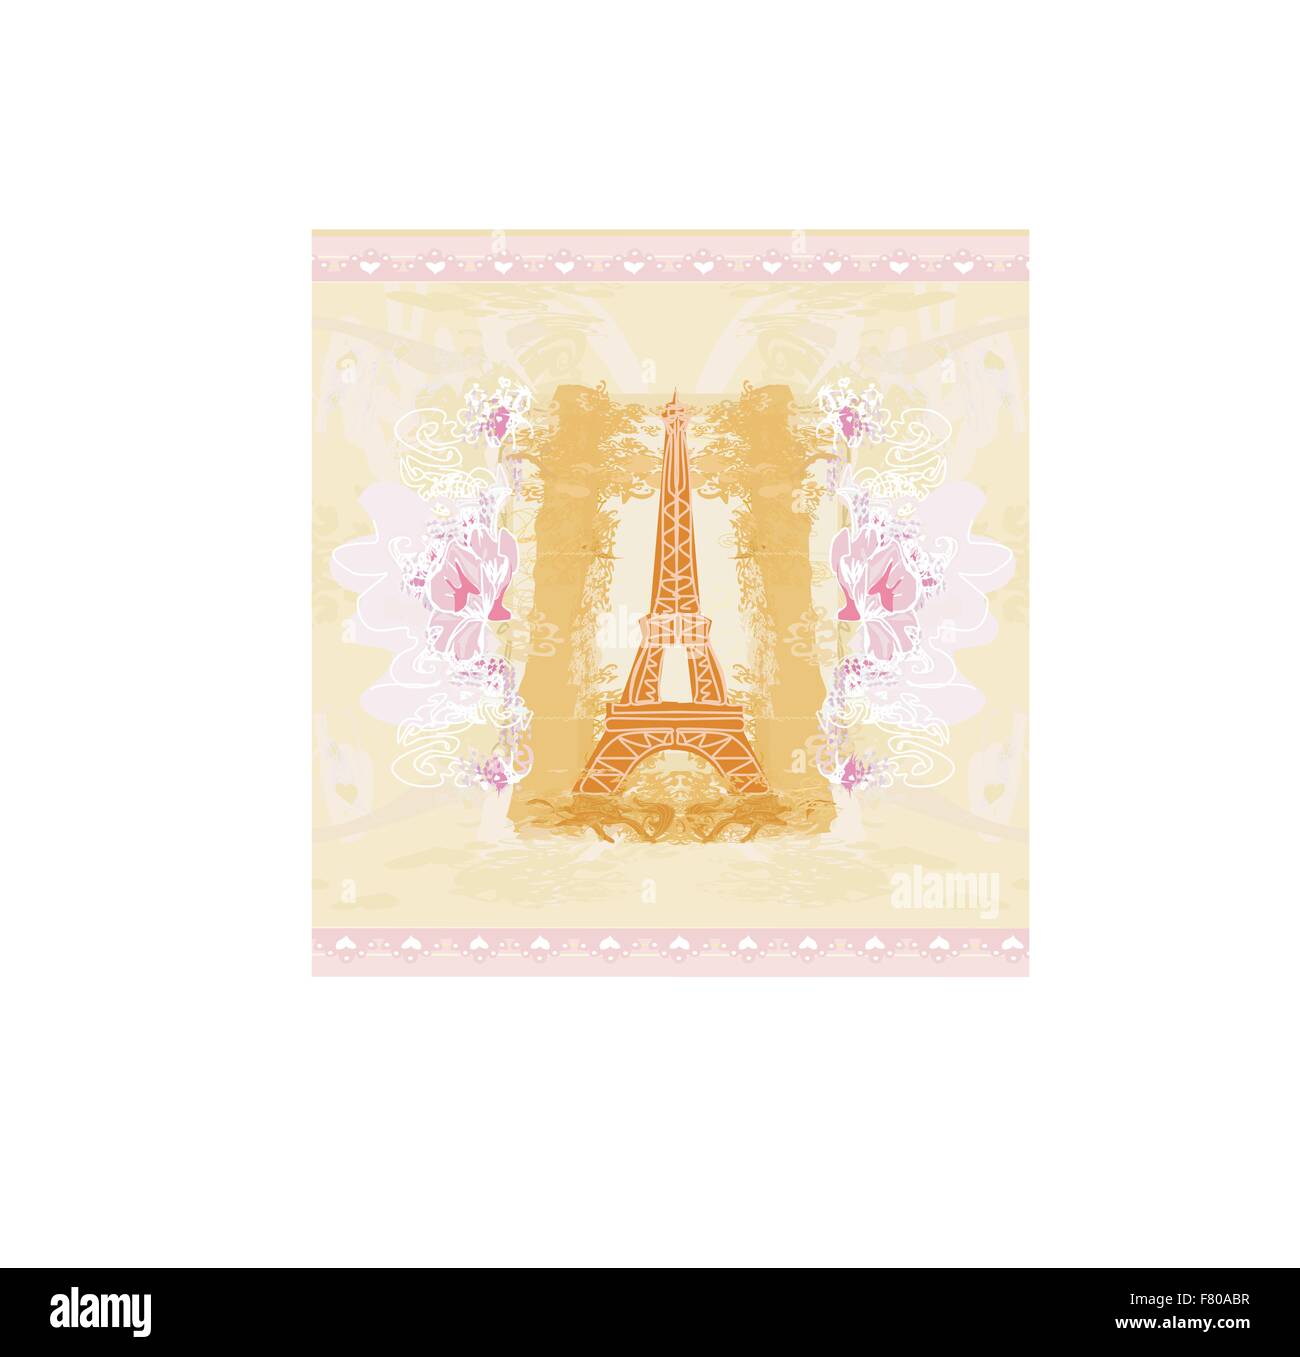 Eiffel tower artistic background Stock Vector